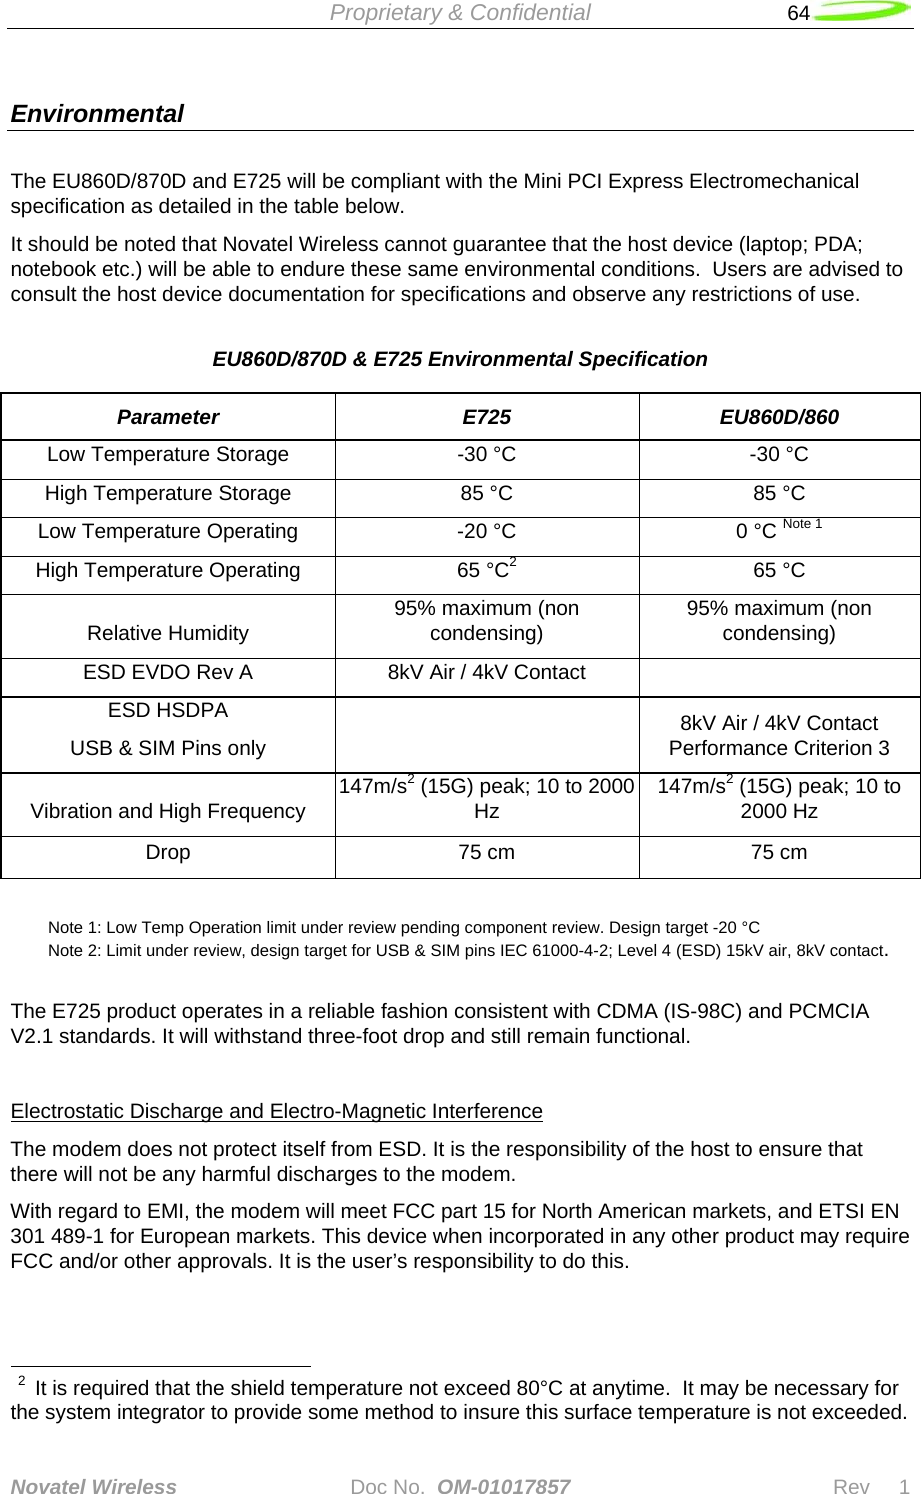  Proprietary &amp; Confidential   64   Novatel Wireless   Doc No.  OM-01017857                              Rev     1  Environmental The EU860D/870D and E725 will be compliant with the Mini PCI Express Electromechanical specification as detailed in the table below. It should be noted that Novatel Wireless cannot guarantee that the host device (laptop; PDA; notebook etc.) will be able to endure these same environmental conditions.  Users are advised to consult the host device documentation for specifications and observe any restrictions of use. EU860D/870D &amp; E725 Environmental Specification Parameter E725 EU860D/860 Low Temperature Storage  -30 °C  -30 °C High Temperature Storage  85 °C  85 °C Low Temperature Operating  -20 °C  0 °C Note 1 High Temperature Operating  65 °C2 65 °C Relative Humidity  95% maximum (non condensing)  95% maximum (non condensing) ESD EVDO Rev A  8kV Air / 4kV Contact   ESD HSDPA  USB &amp; SIM Pins only     8kV Air / 4kV Contact Performance Criterion 3 Vibration and High Frequency  147m/s2(15G) peak; 10 to 2000 Hz  147m/s2 (15G) peak; 10 to 2000 Hz Drop  75 cm  75 cm   Note 1: Low Temp Operation limit under review pending component review. Design target -20 °C  Note 2: Limit under review, design target for USB &amp; SIM pins IEC 61000-4-2; Level 4 (ESD) 15kV air, 8kV contact.  The E725 product operates in a reliable fashion consistent with CDMA (IS-98C) and PCMCIA V2.1 standards. It will withstand three-foot drop and still remain functional.  Electrostatic Discharge and Electro-Magnetic Interference The modem does not protect itself from ESD. It is the responsibility of the host to ensure that there will not be any harmful discharges to the modem.  With regard to EMI, the modem will meet FCC part 15 for North American markets, and ETSI EN 301 489-1 for European markets. This device when incorporated in any other product may require FCC and/or other approvals. It is the user’s responsibility to do this.                                                           2  It is required that the shield temperature not exceed 80°C at anytime.  It may be necessary for the system integrator to provide some method to insure this surface temperature is not exceeded. 